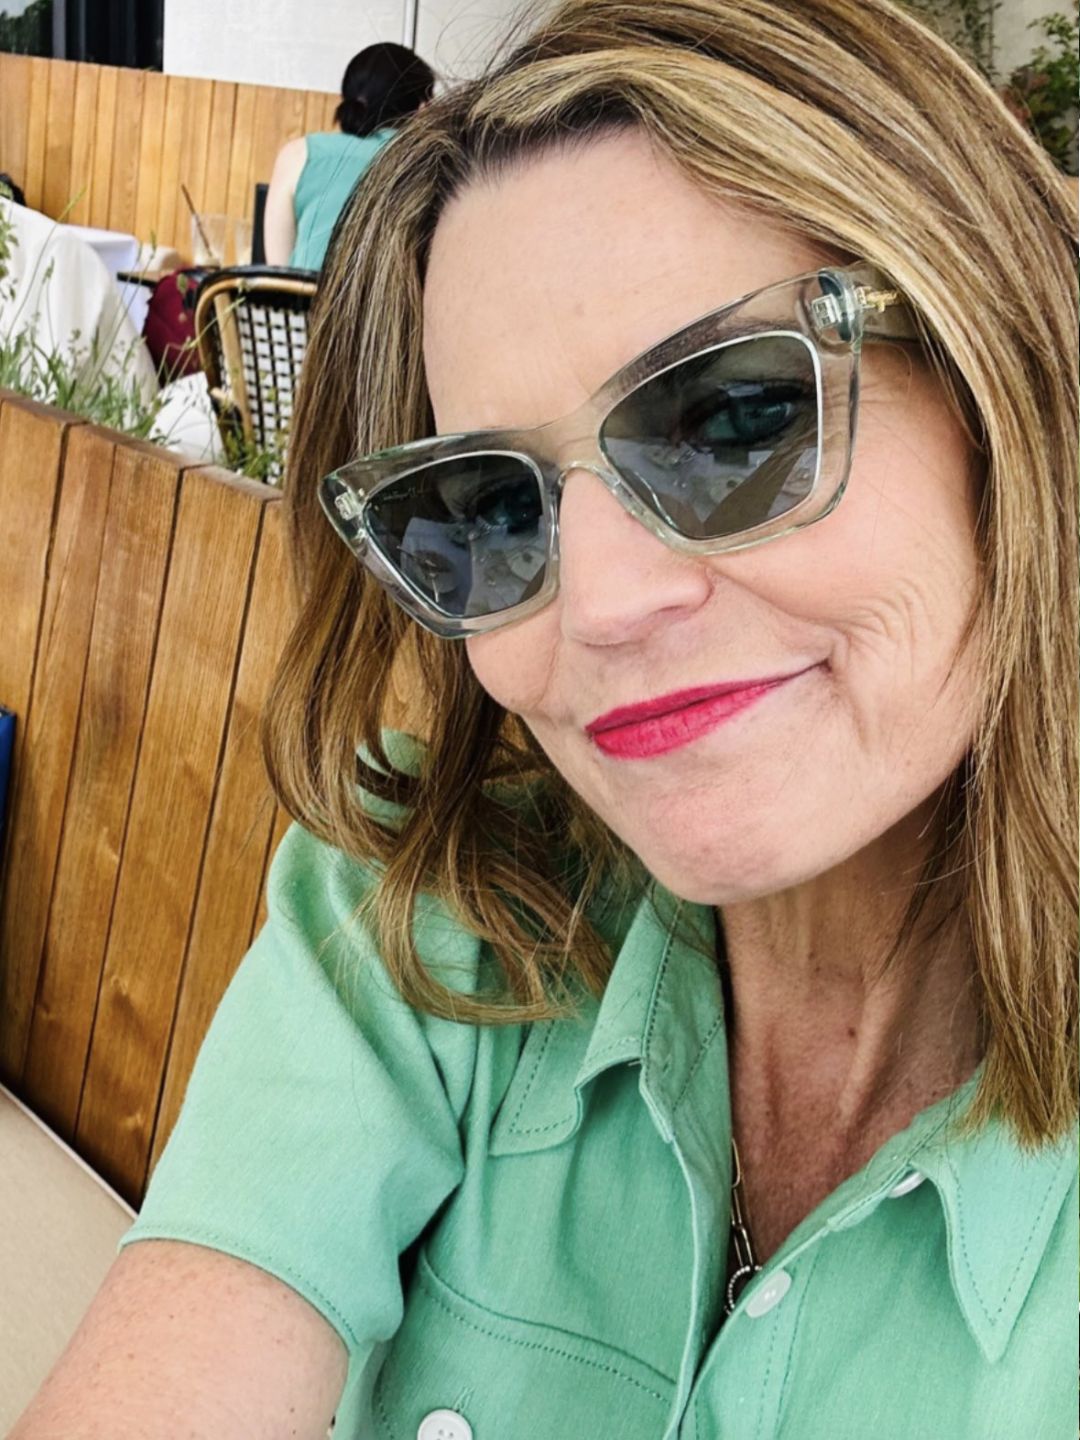 Savannah Guthrie smiling in a selife, wearing sunglasses